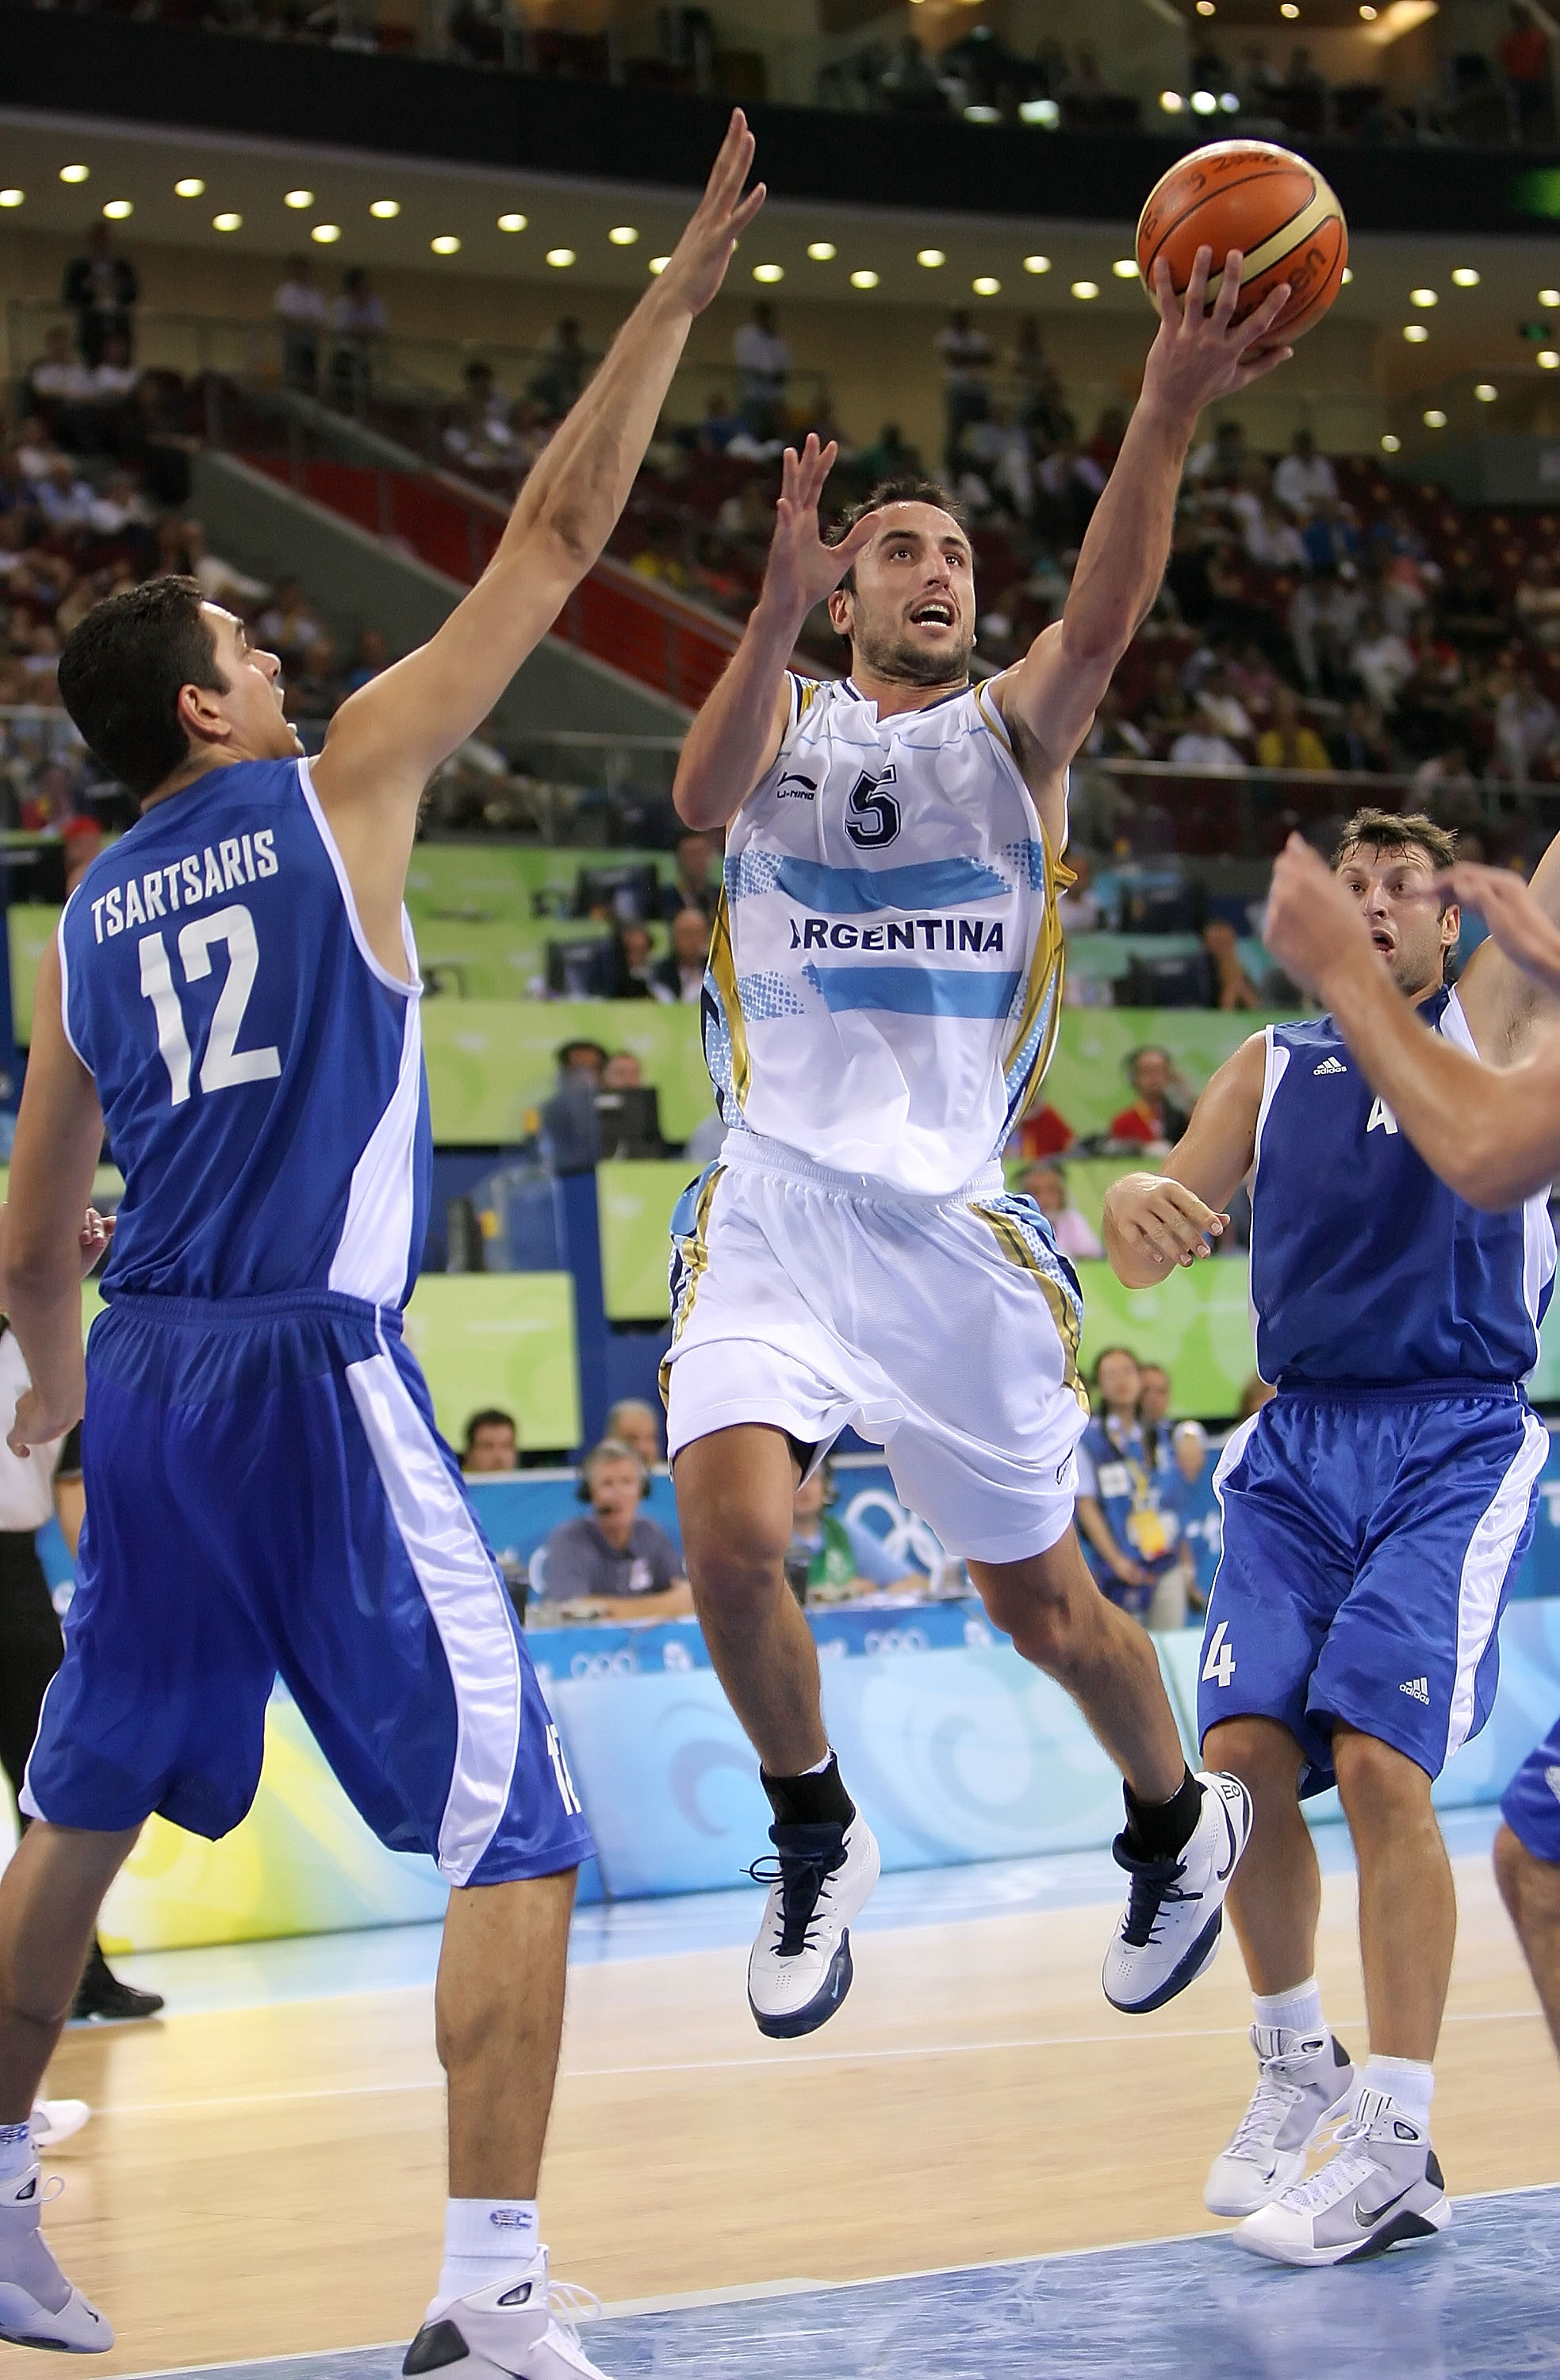 BEIJING - AUGUST 20:  Manu Ginobili #5 of Argentina drives to the basket over the defense of Konstantinos Tsartsaris #12 of Greece during the men's basketball quarterfinal game at the Olympic Basketball Gymnasium during Day 12 of the Beijing 2008 Olympic